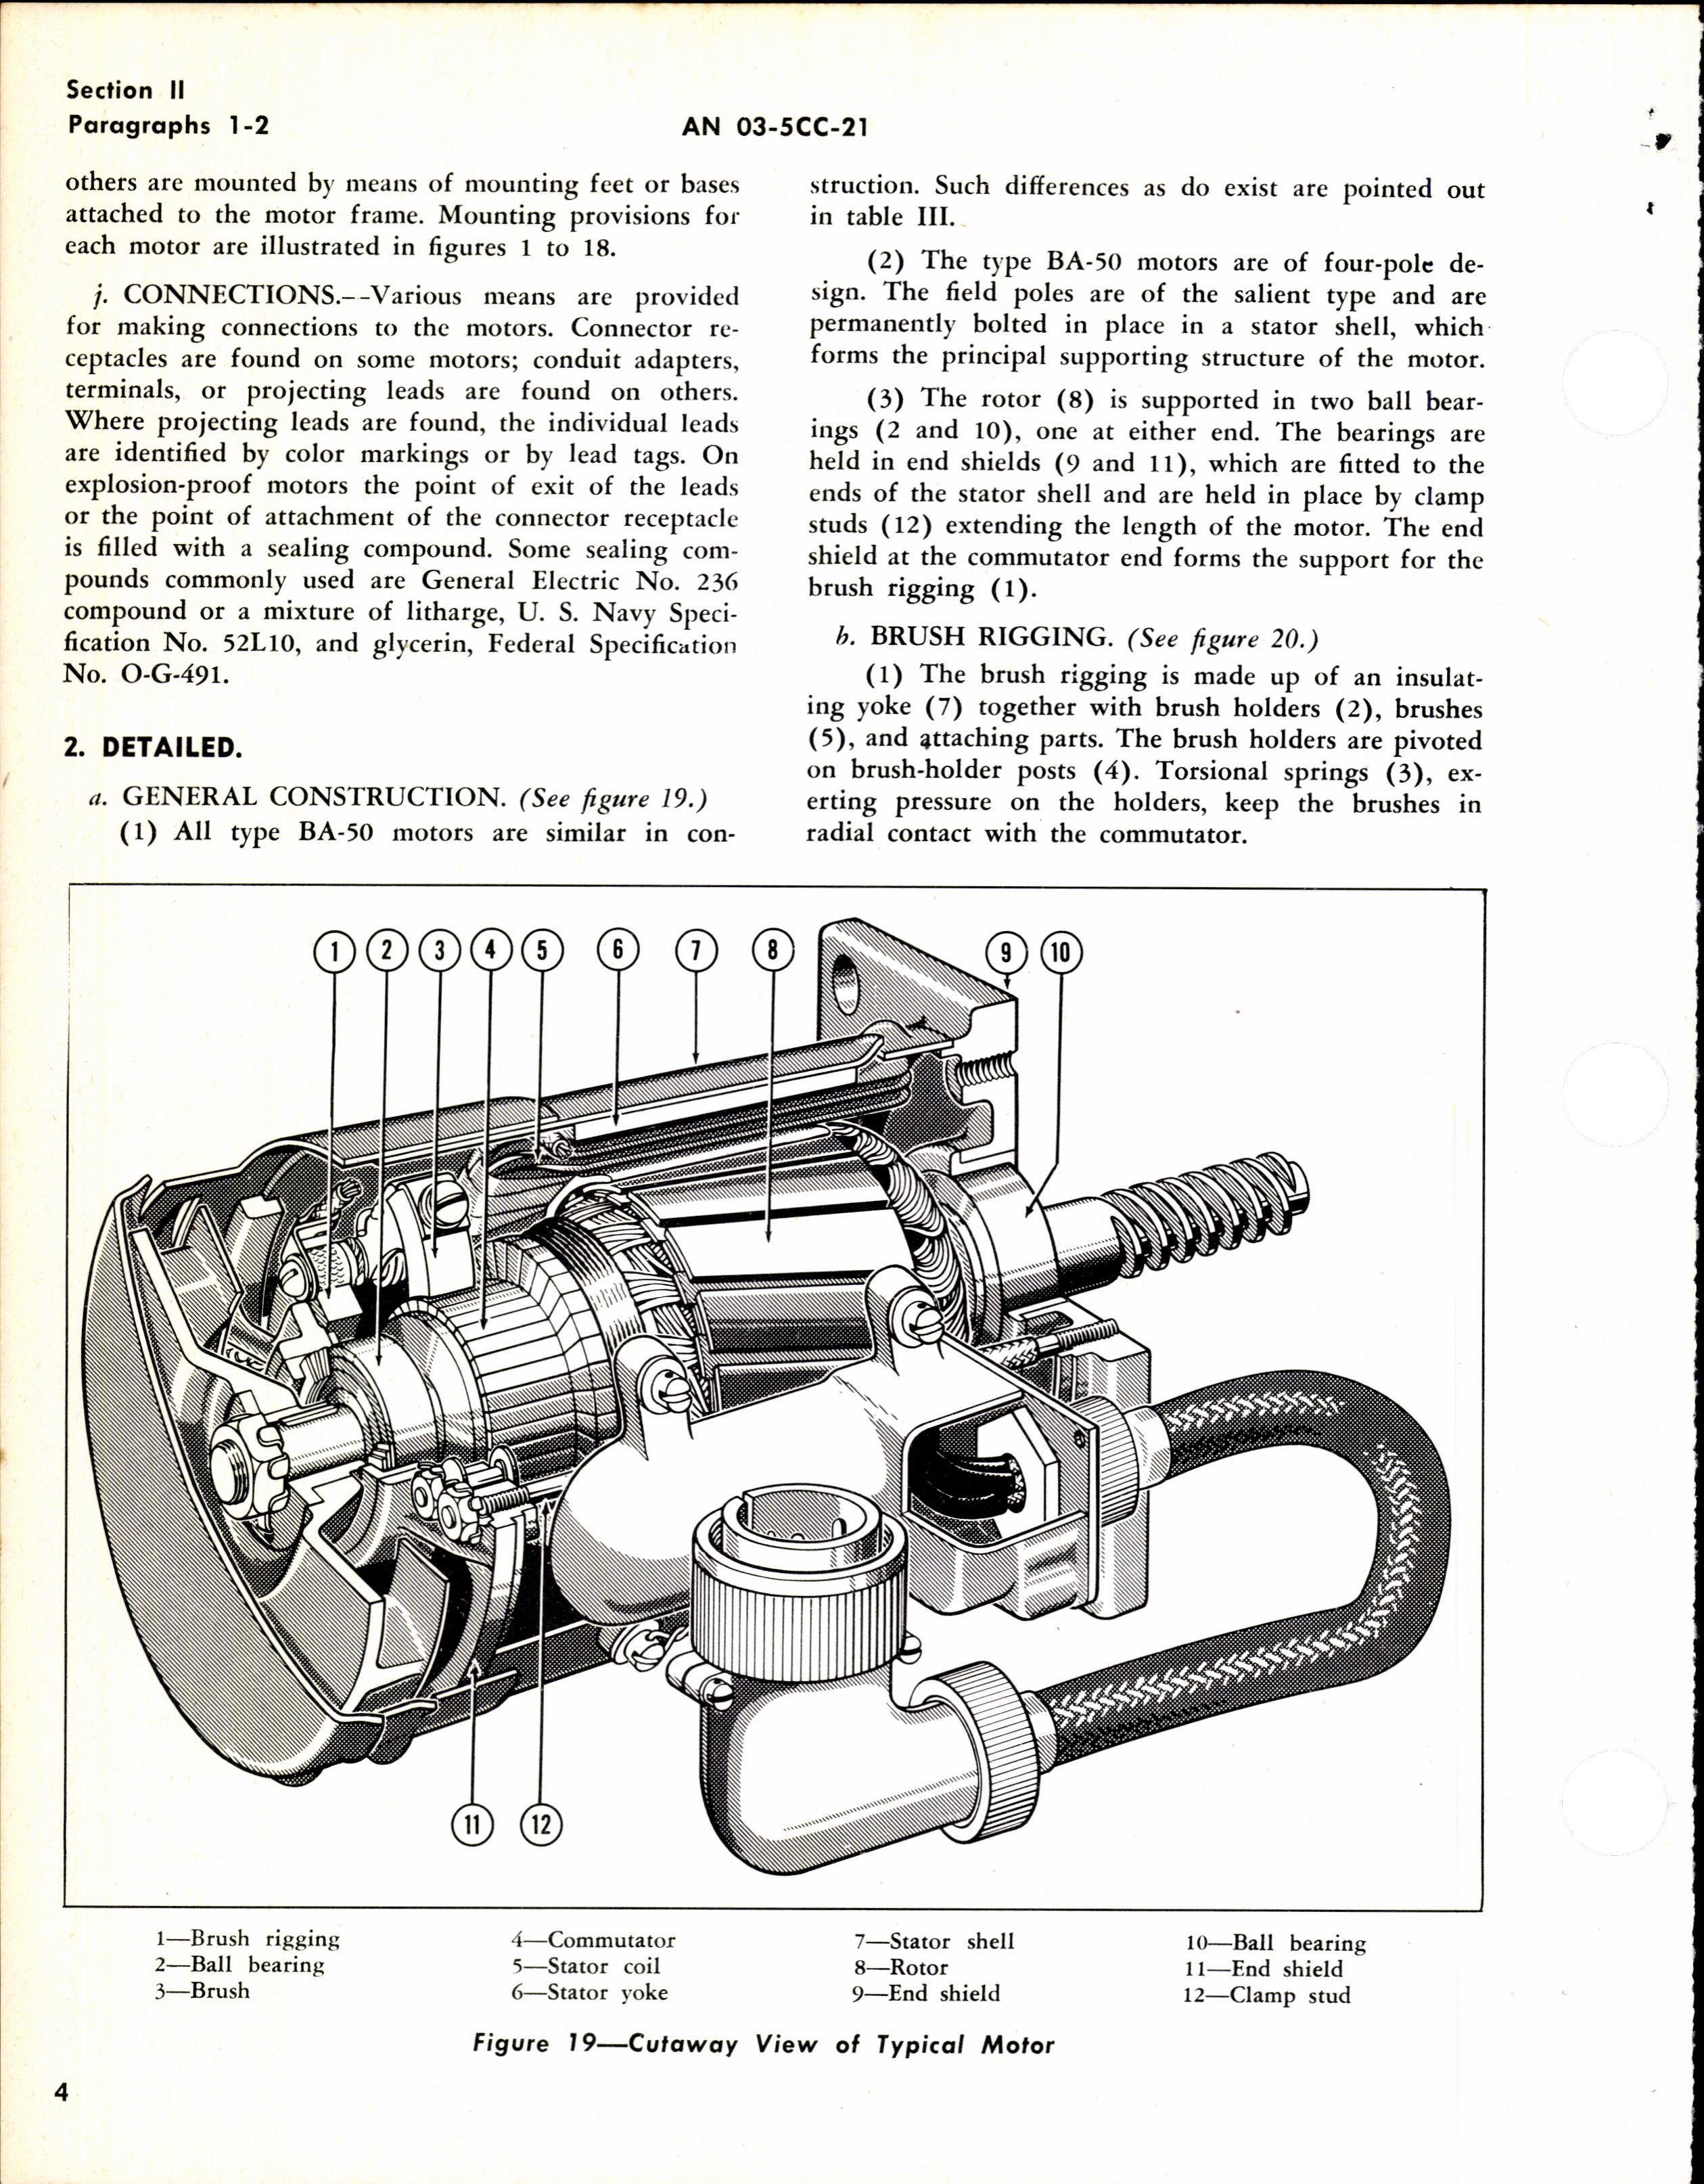 Sample page 6 from AirCorps Library document: HB of Instructions with Parts Catalog for Model 5BA50 Electric Motor